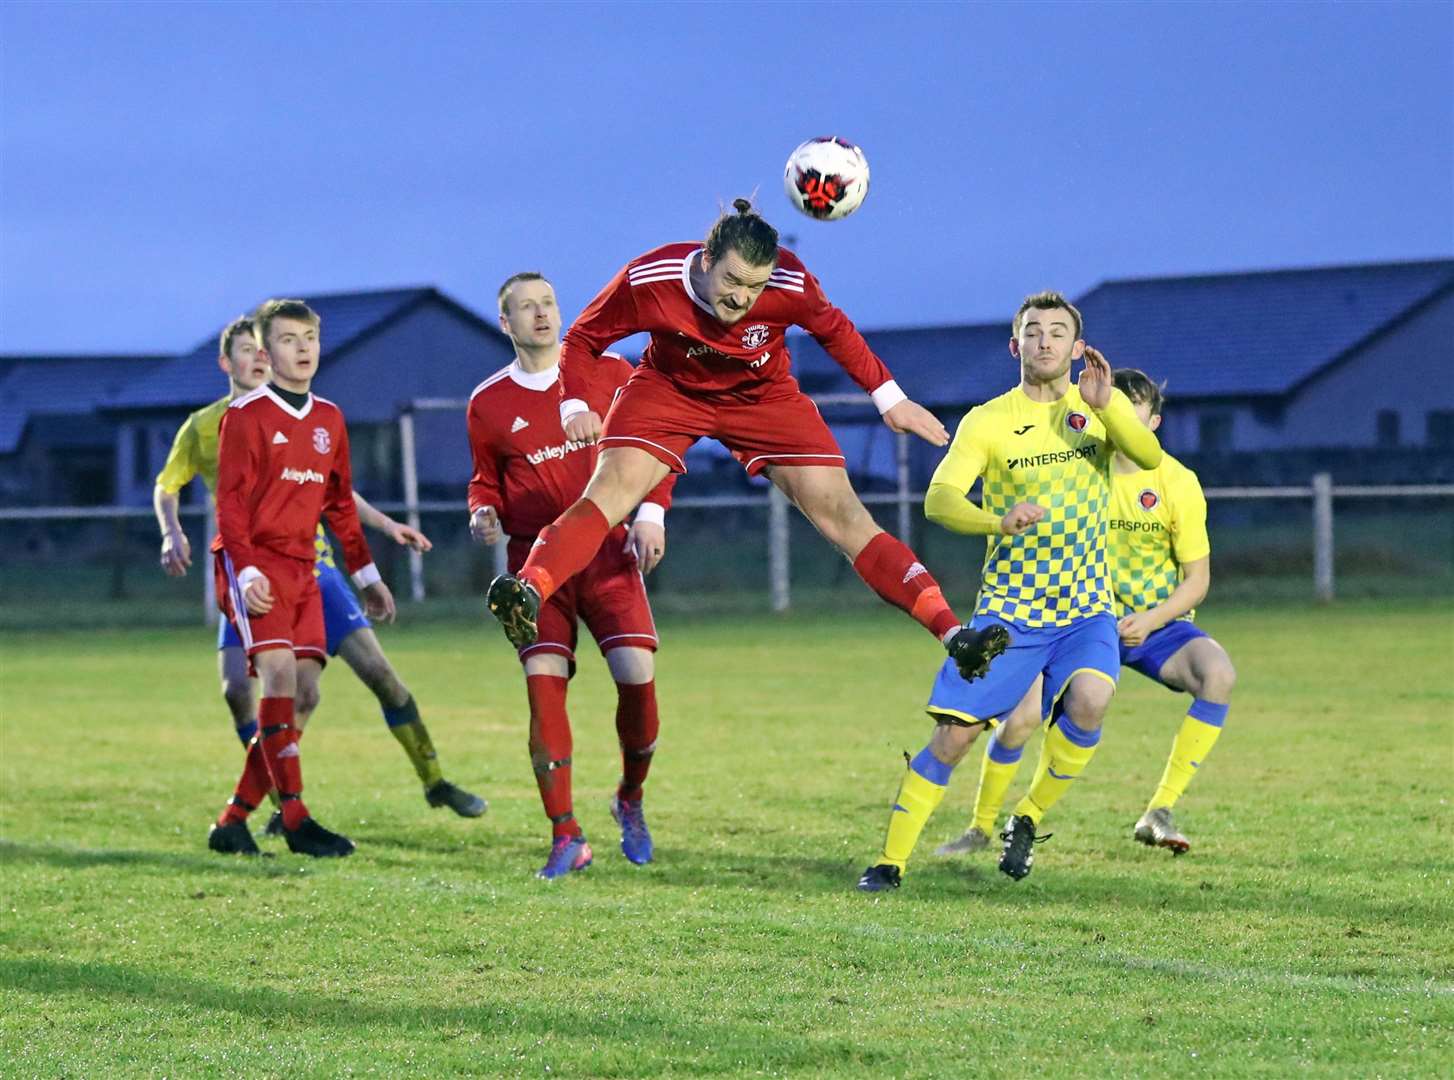 Thurso's James McLean heads clear from a corner during the Vikings' 1-0 win against Orkney in Halkirk. Picture: James Gunn